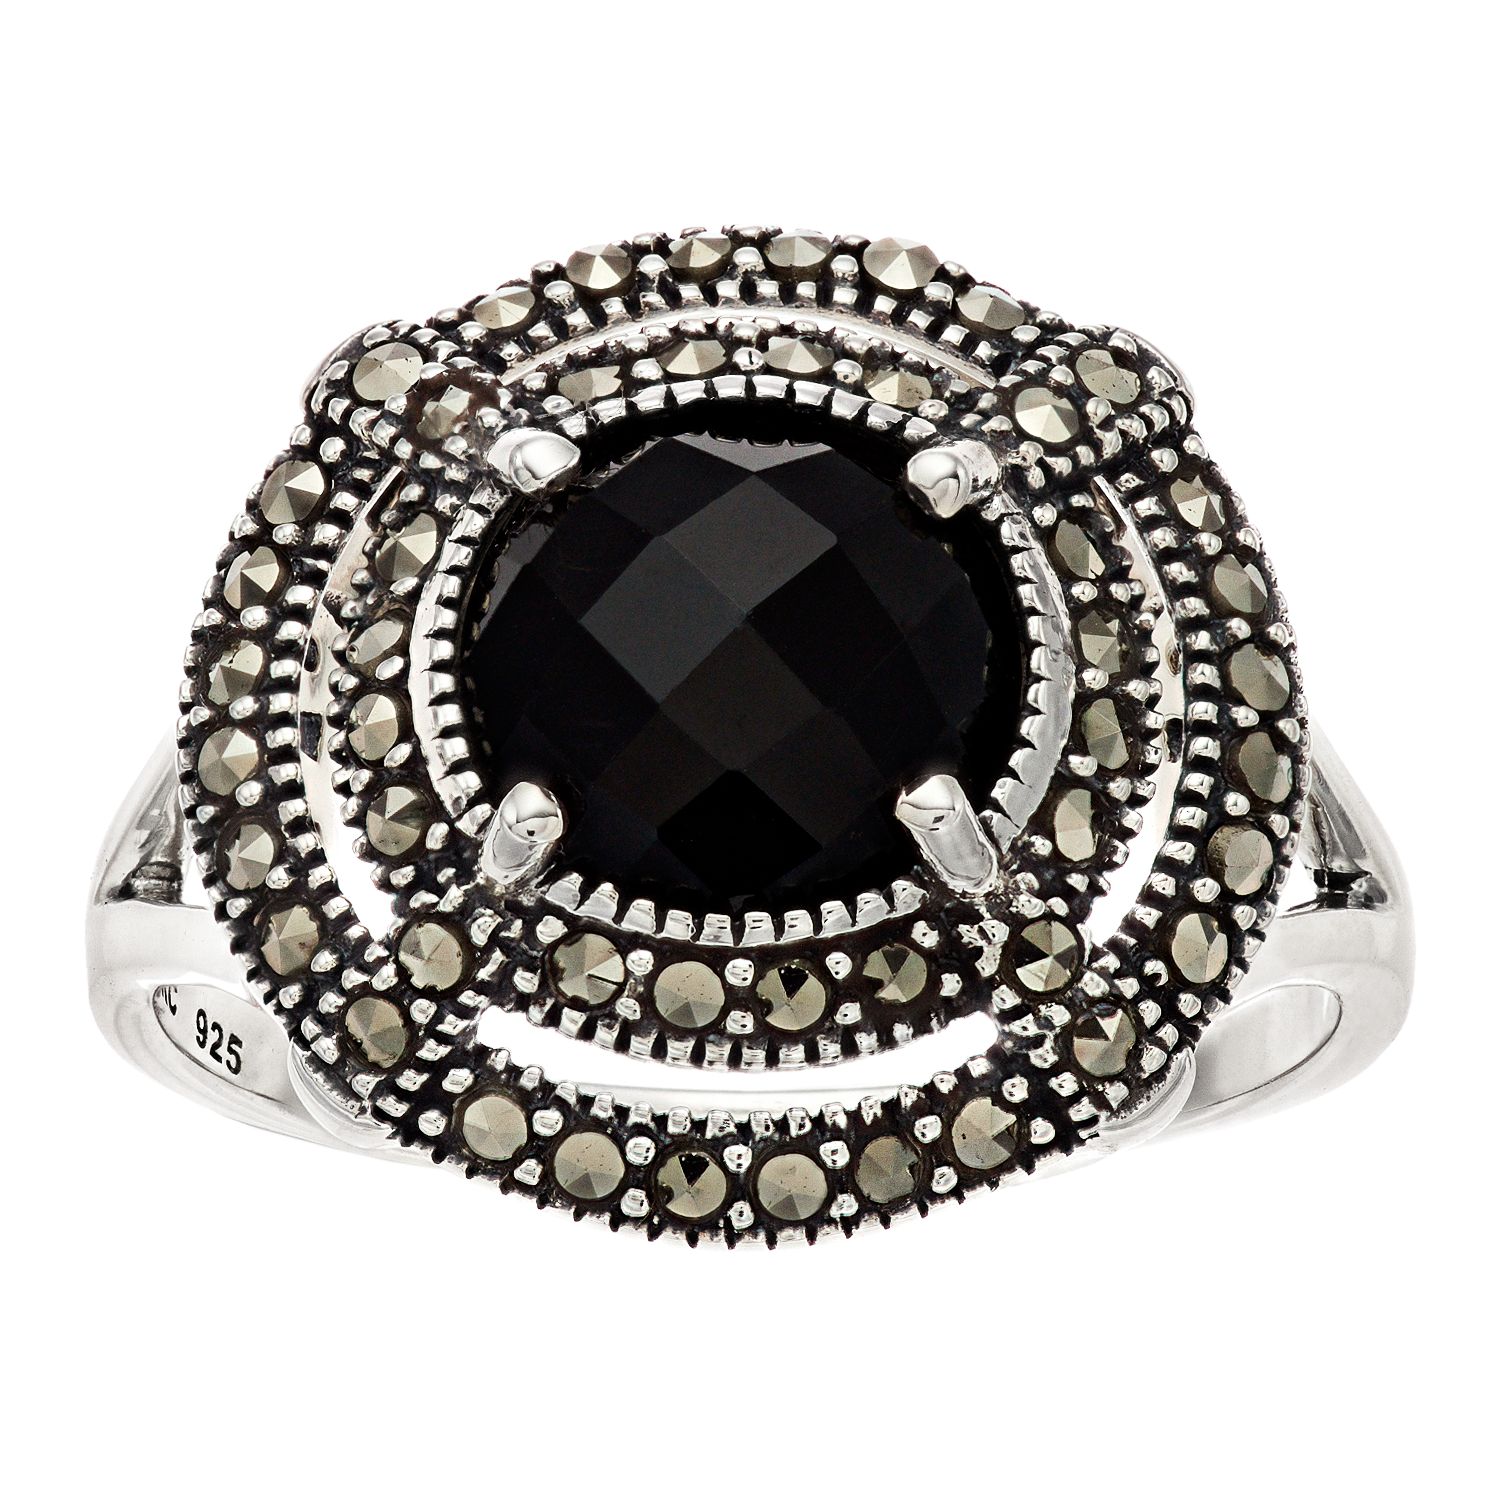 Image for Lavish by TJM Sterling Silver Black Onyx & Marcasite Circle Ring at Kohl's.